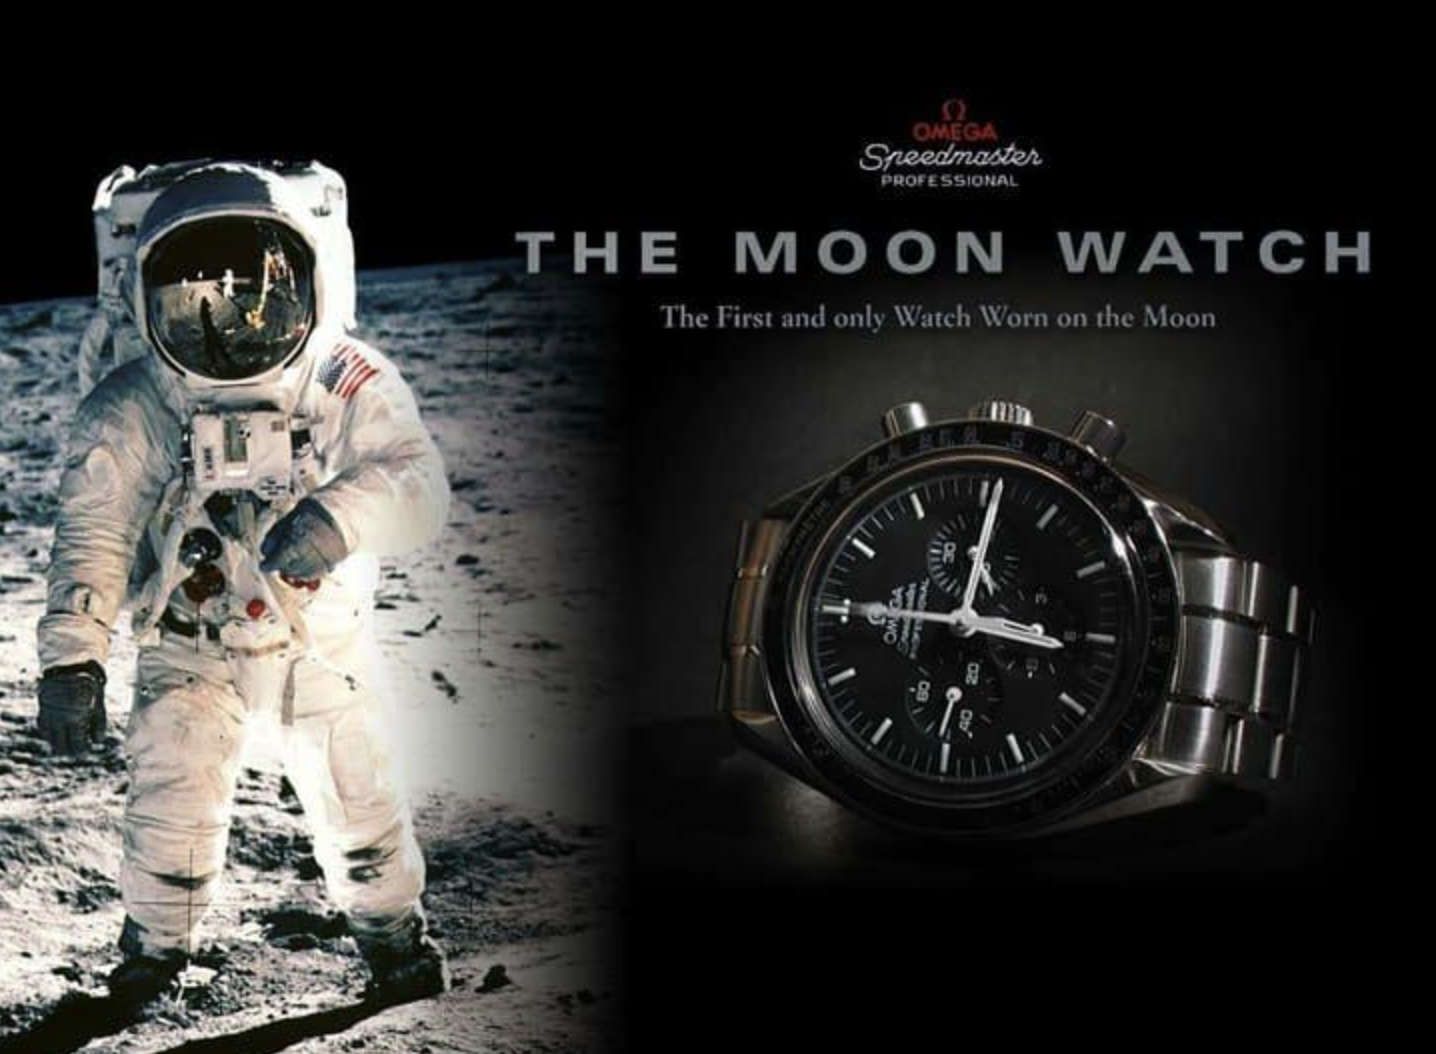 The Moon Watch